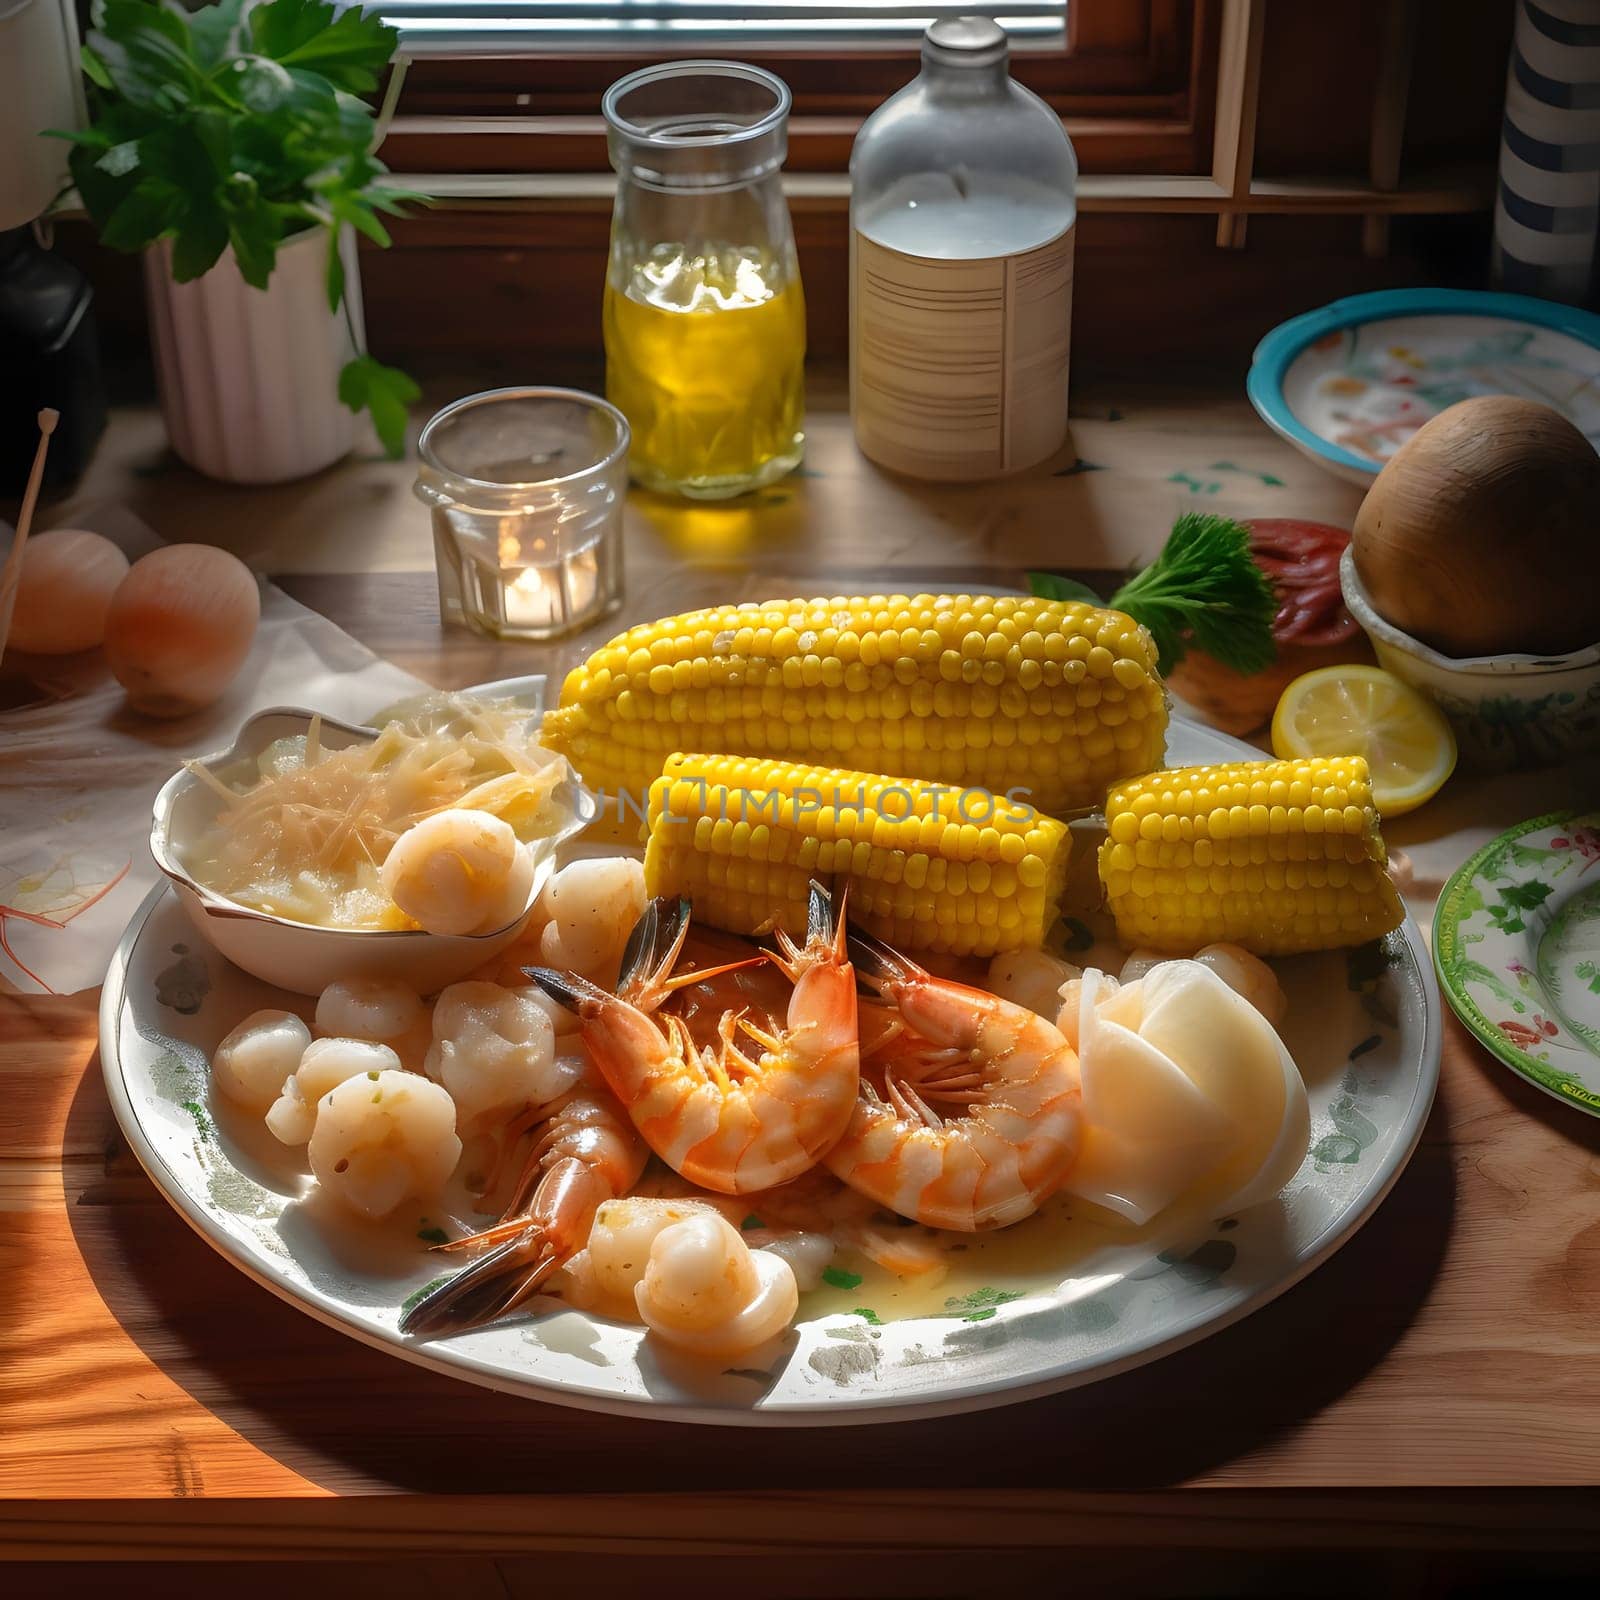 Yellow corn cobs and shrimps on a plate. Corn as a dish of thanksgiving for the harvest. An atmosphere of joy and celebration.